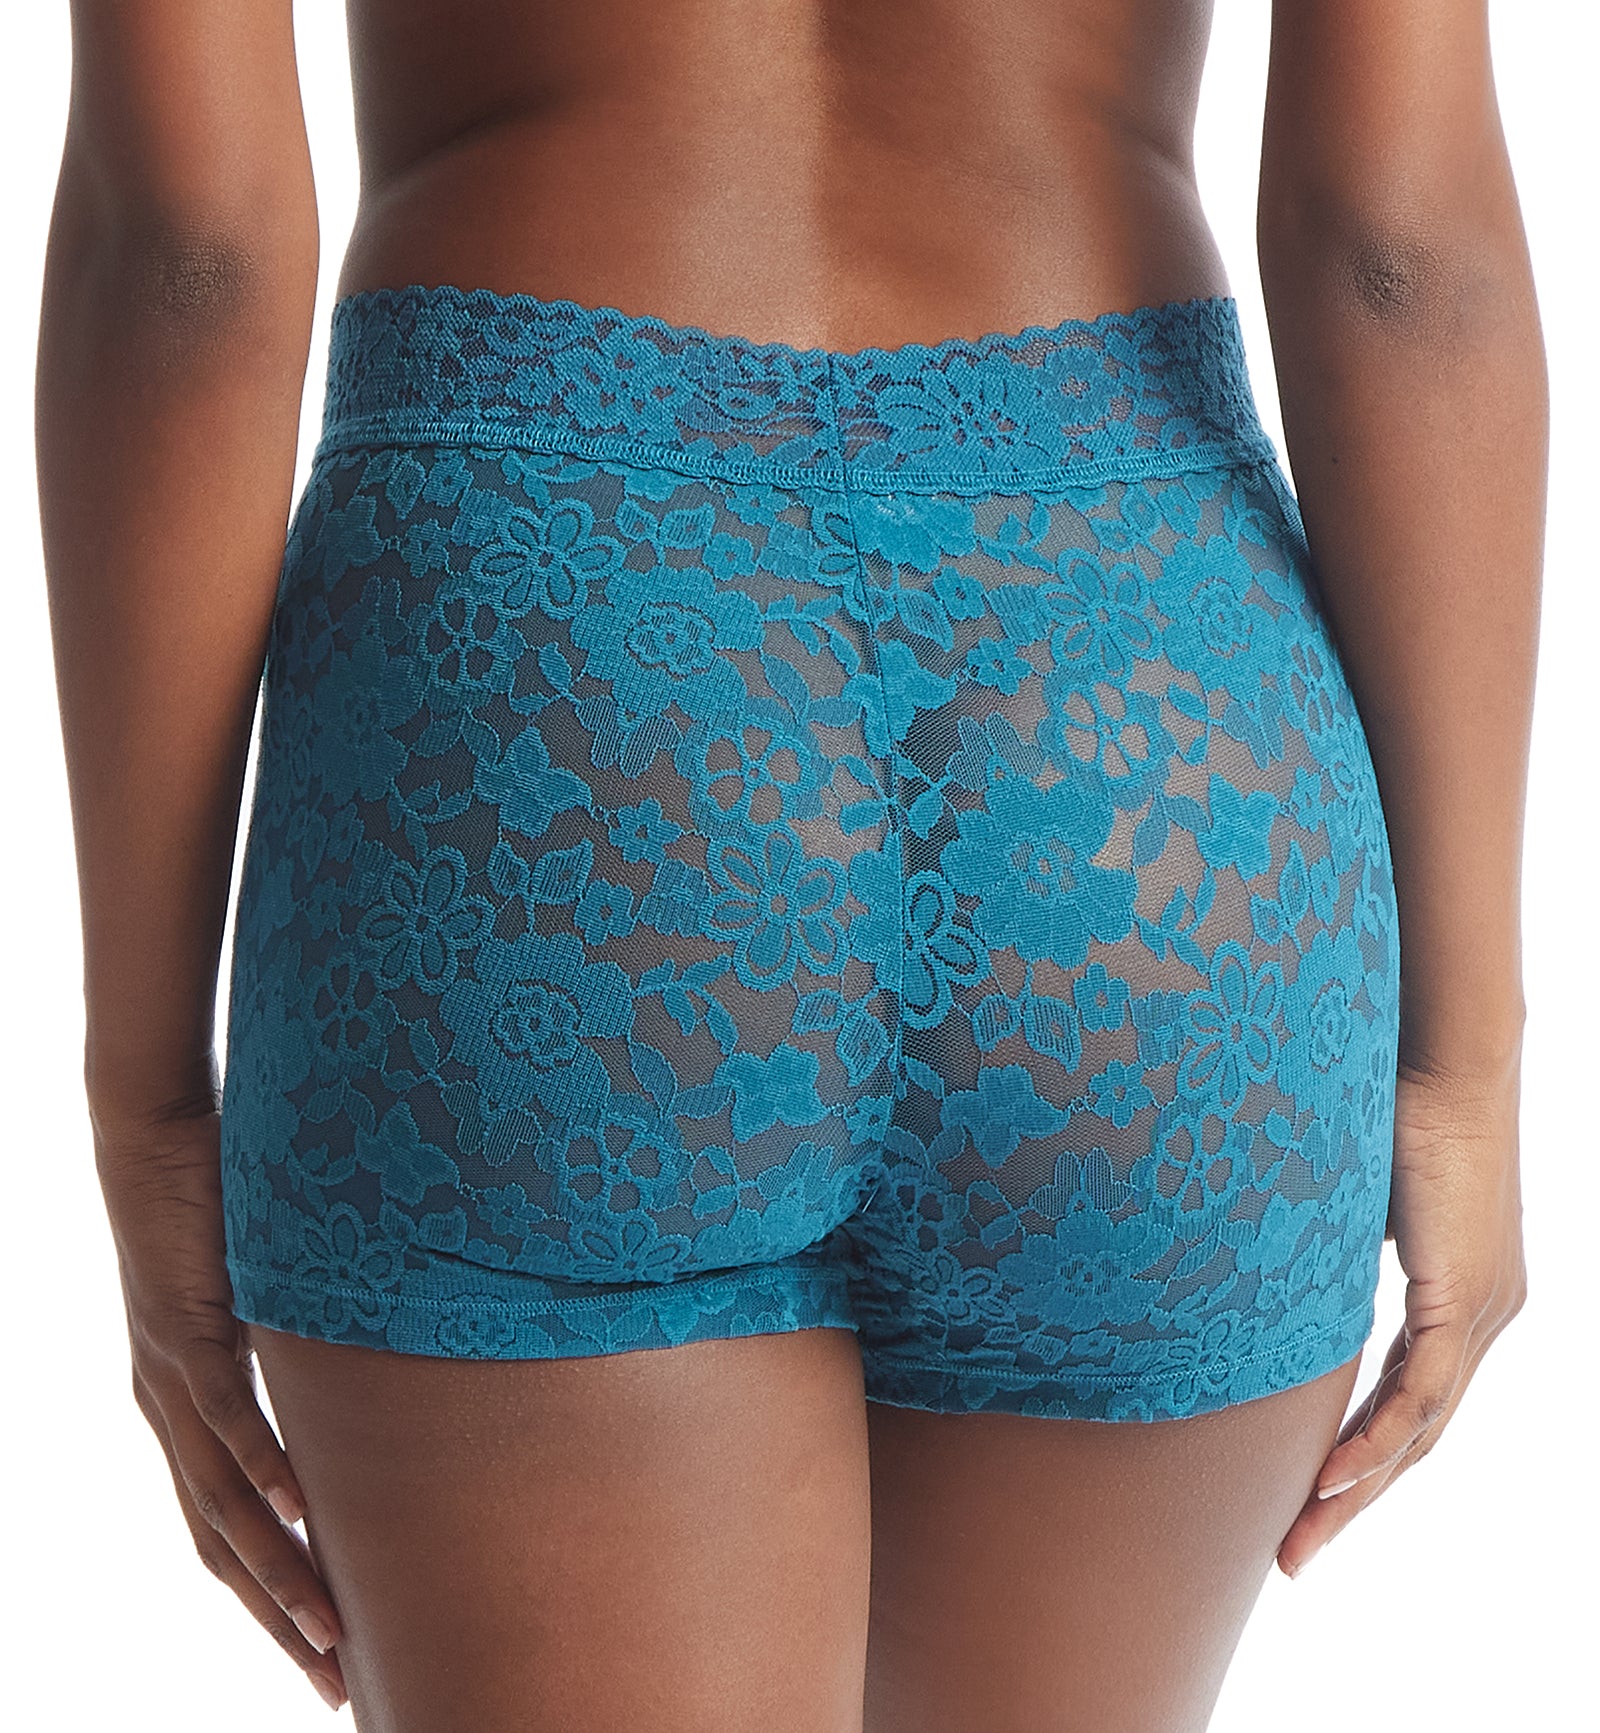 Hanky Panky Daily Lace Boxer Brief (771252P),XS,Earth Dance - Earth Dance,XS